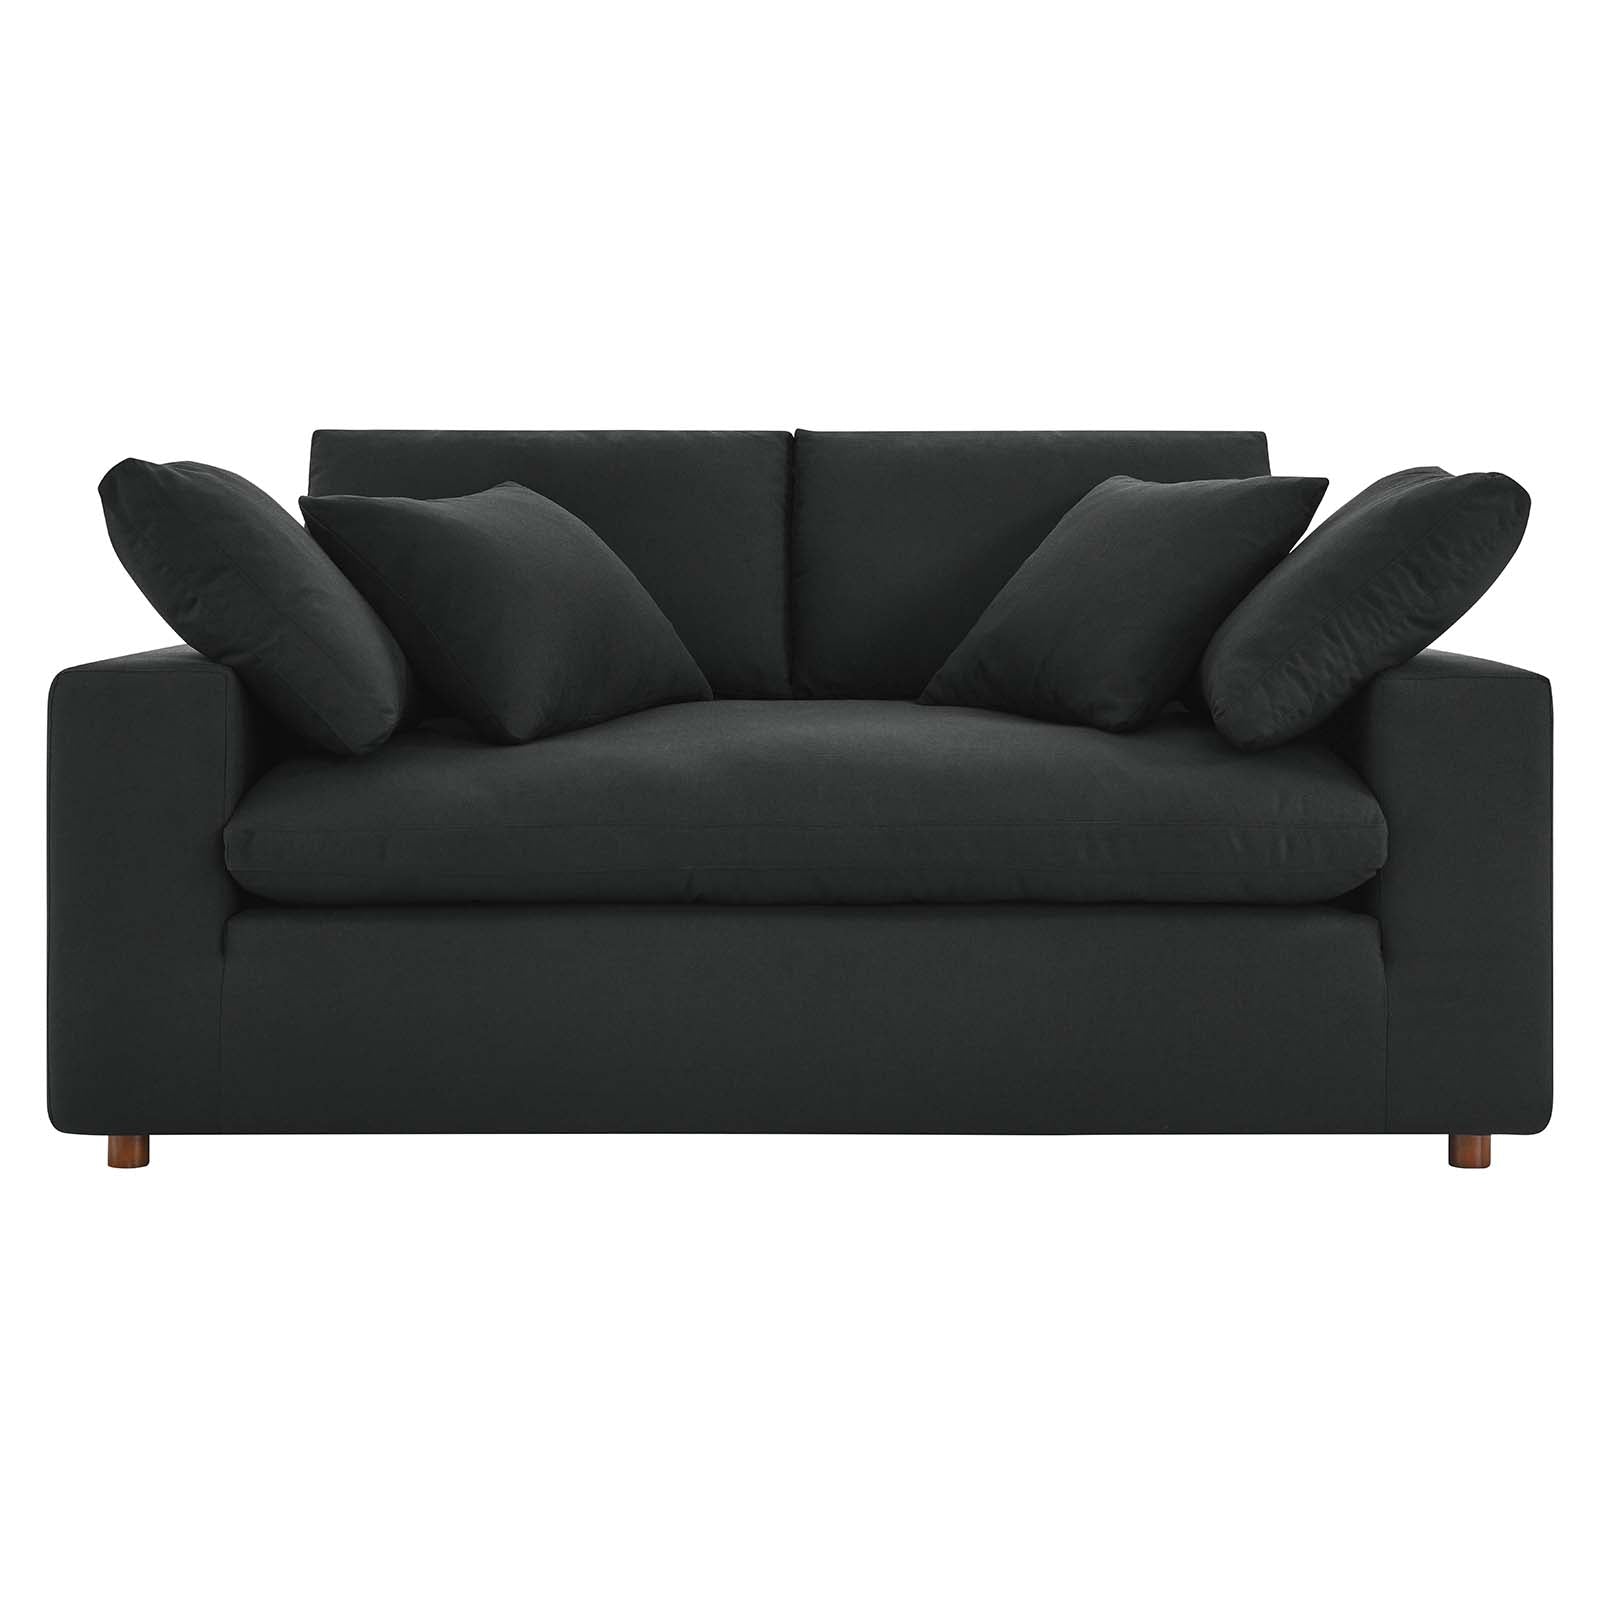 Commix Down Filled Overstuffed Loveseat - East Shore Modern Home Furnishings